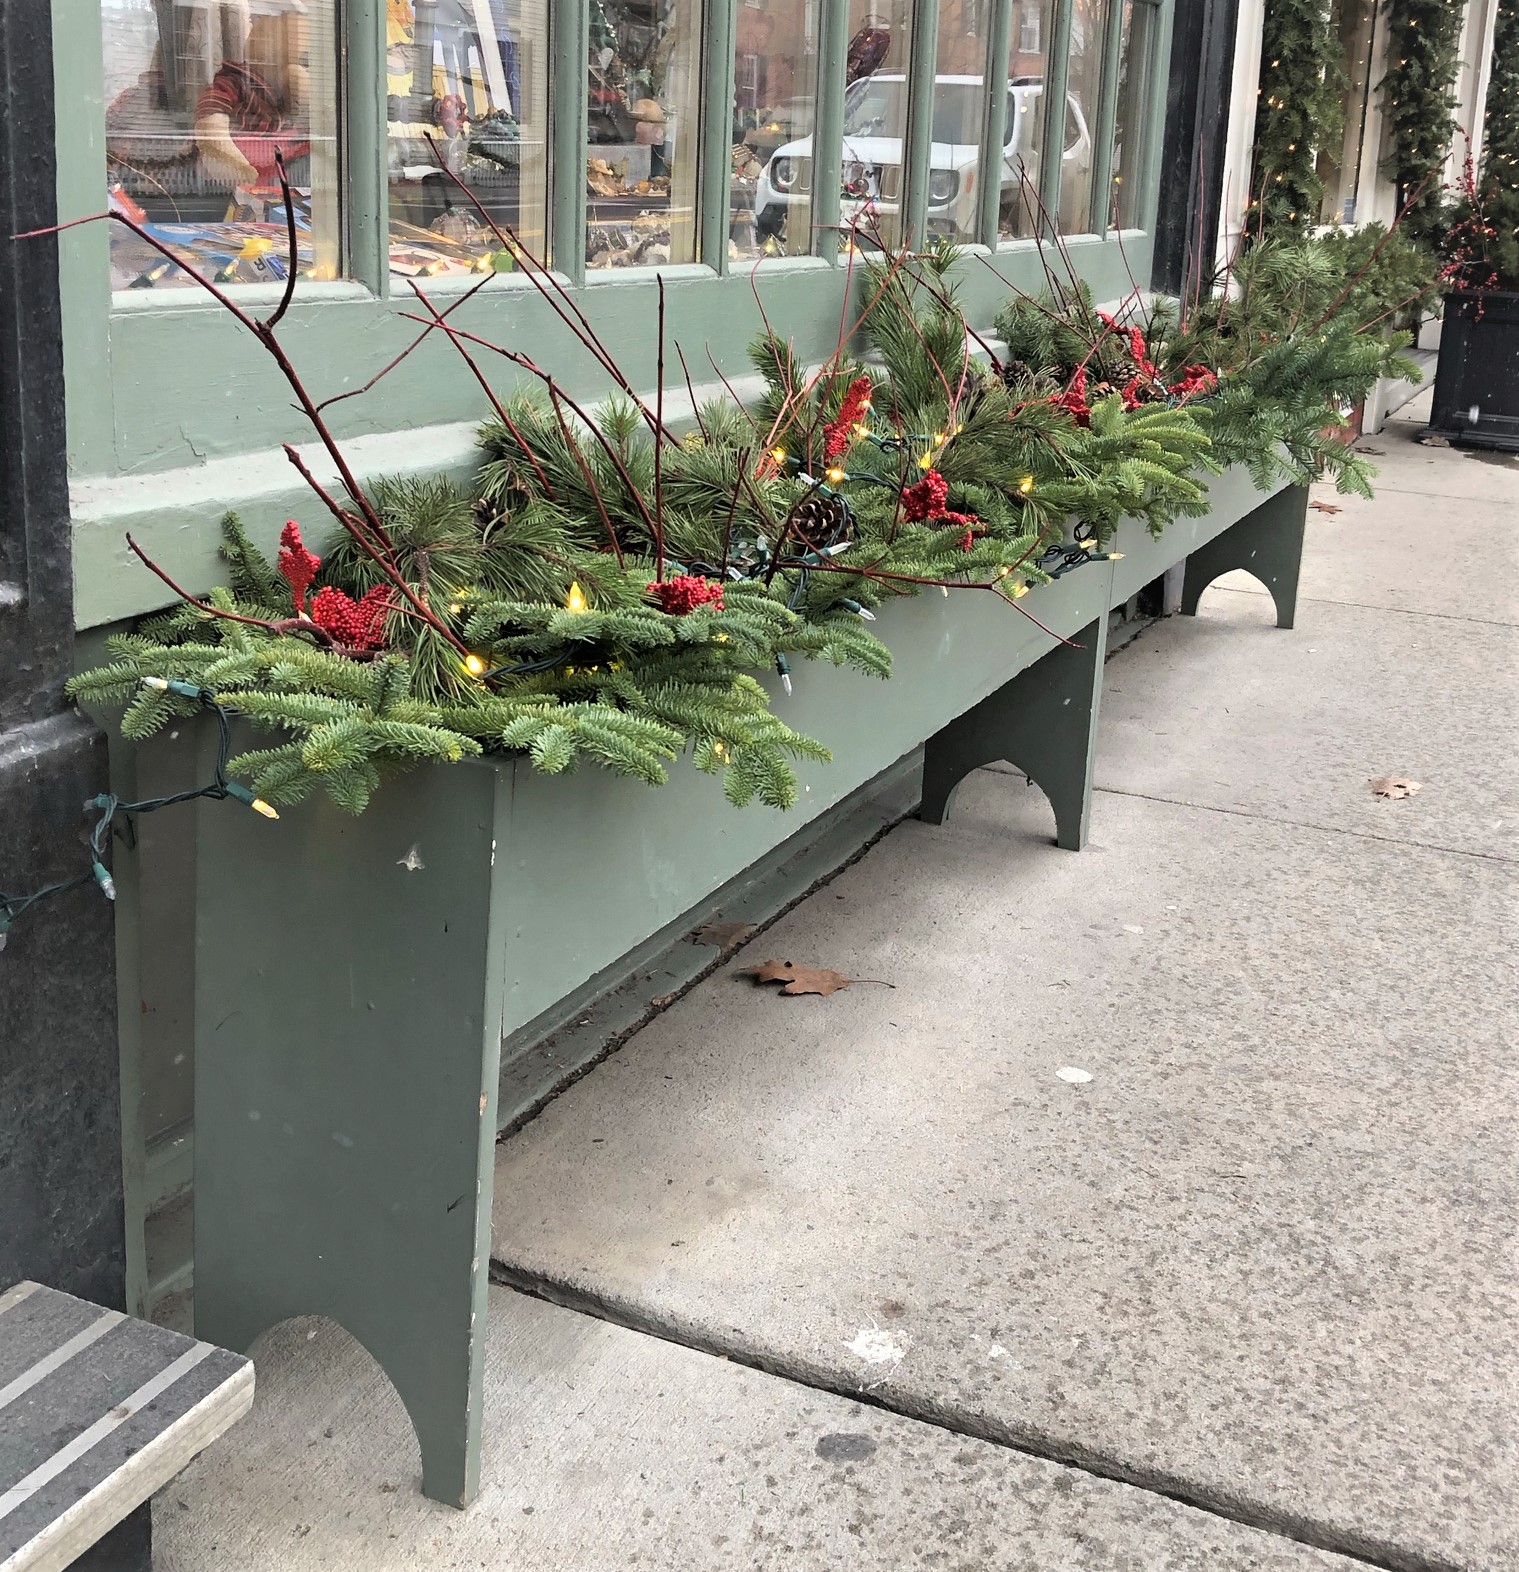 Christmas decorations in the town of Woodstock, Vermont